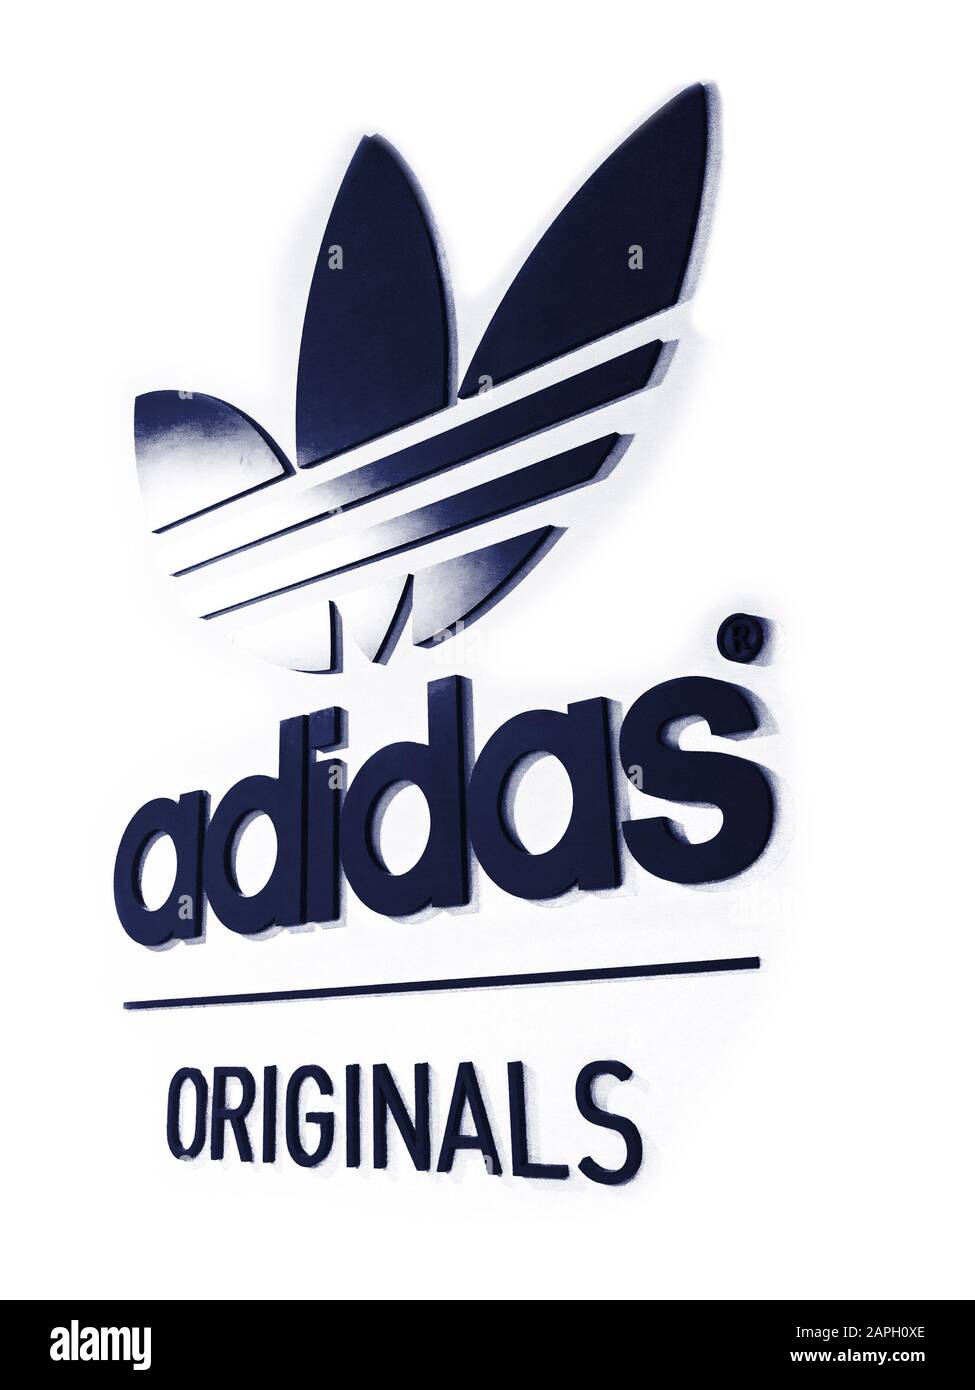 Adidas logo Cut Out Stock Images & Pictures - Alamy